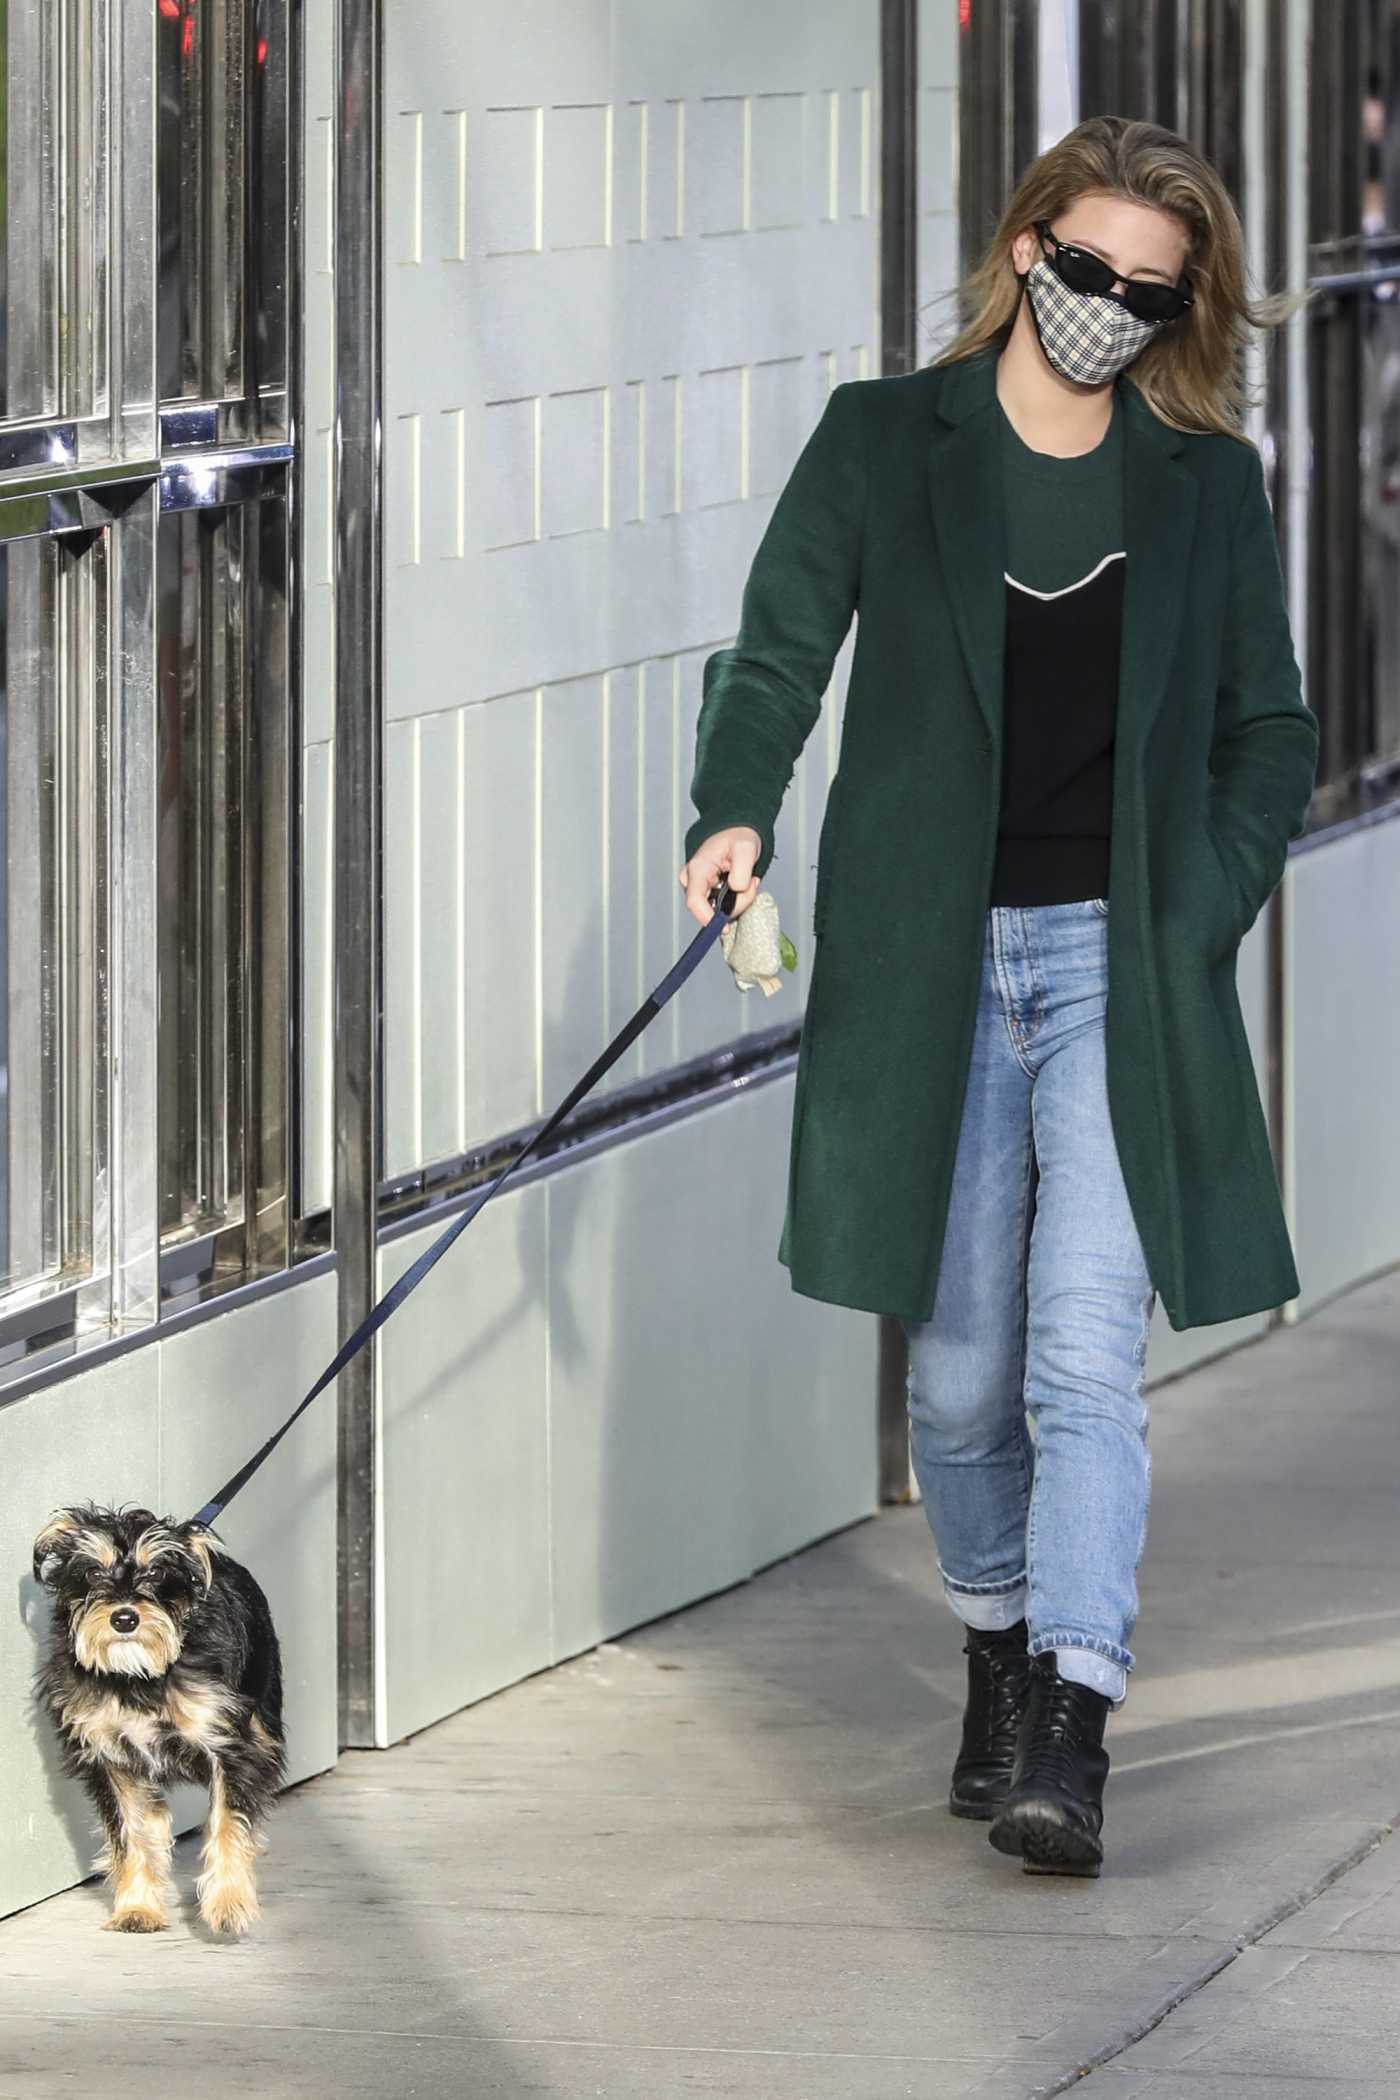 Lili Reinhart in a Green Coat Walks Her Dog in Vancouver 12/13/2020